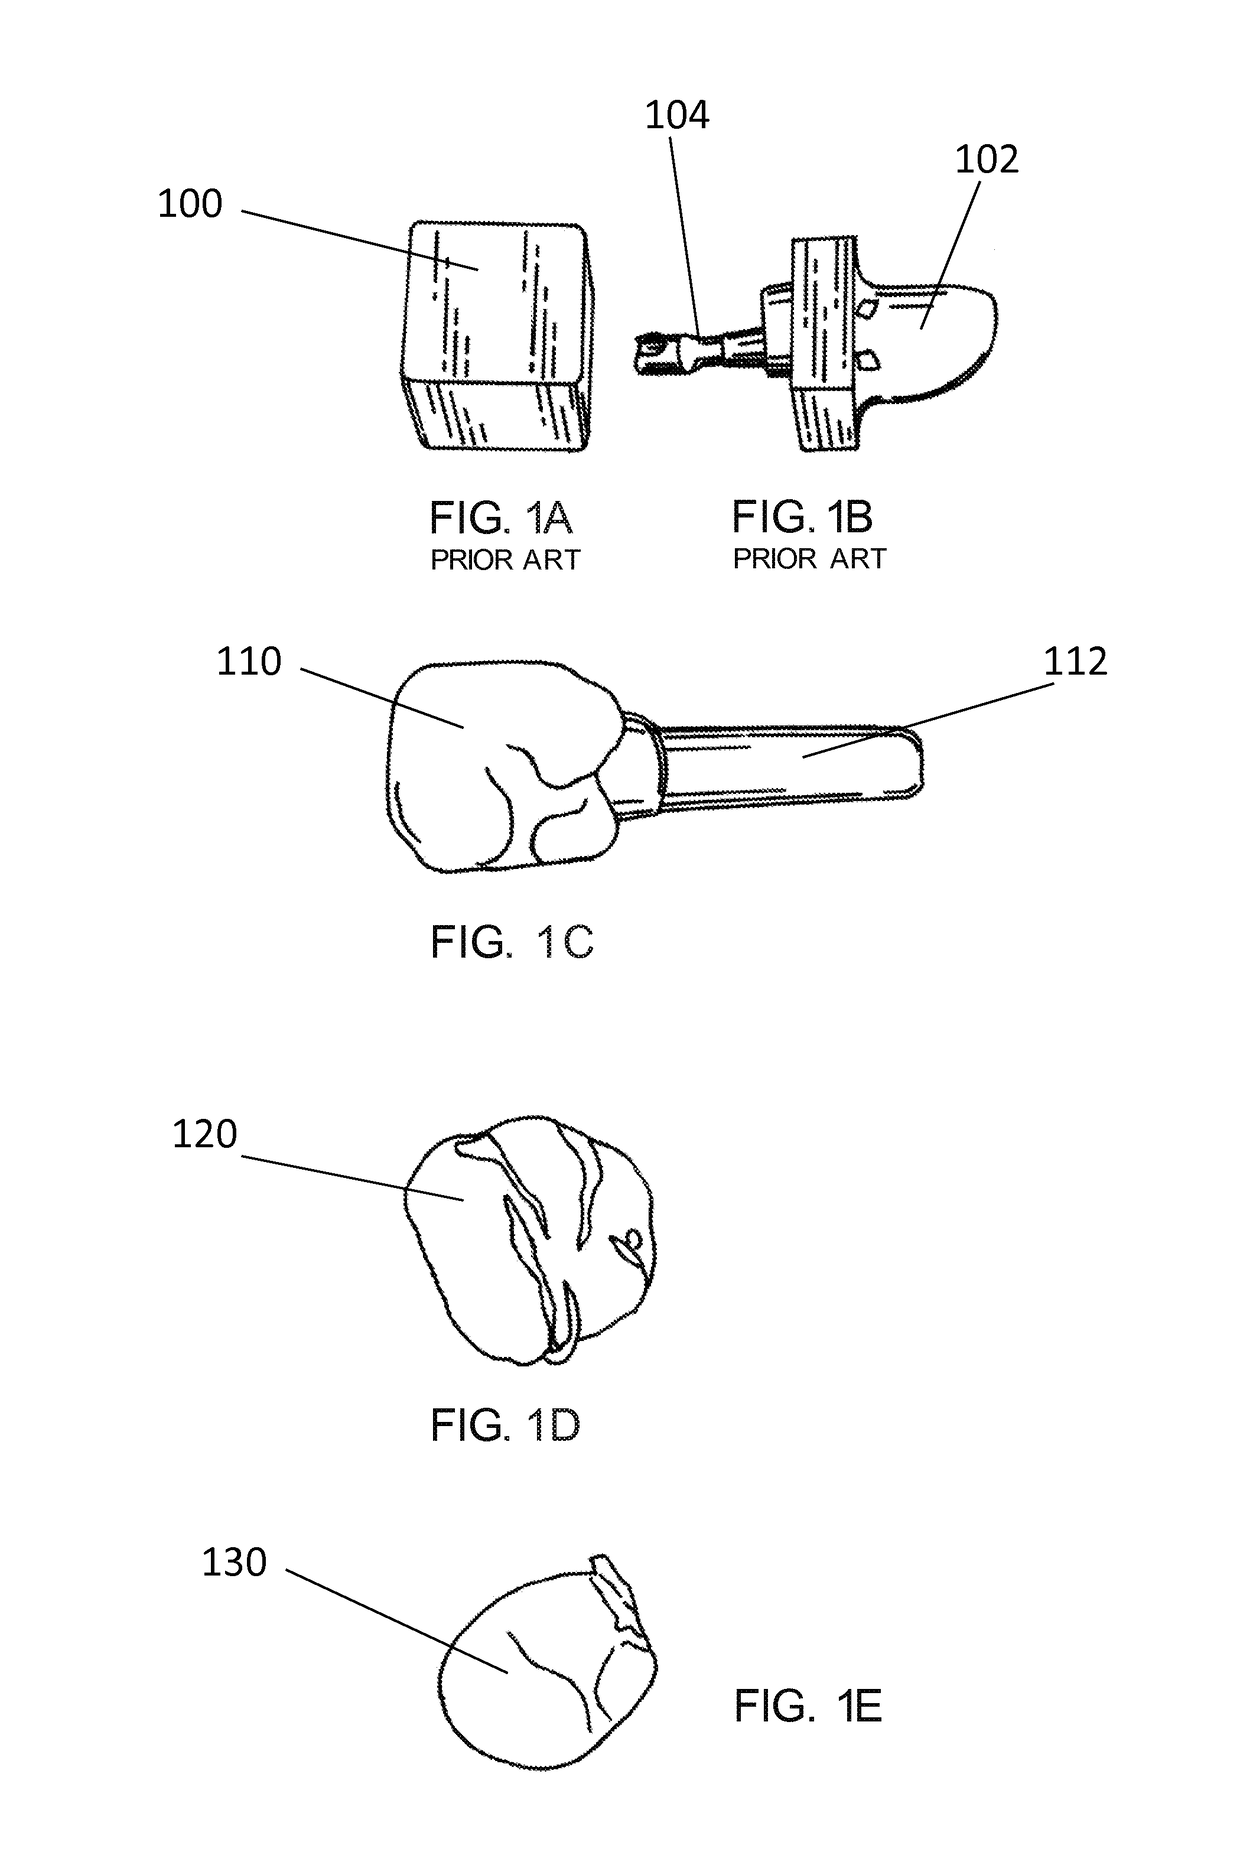 Method and apparatus for preparing a ceramic dental restoration in one appointment